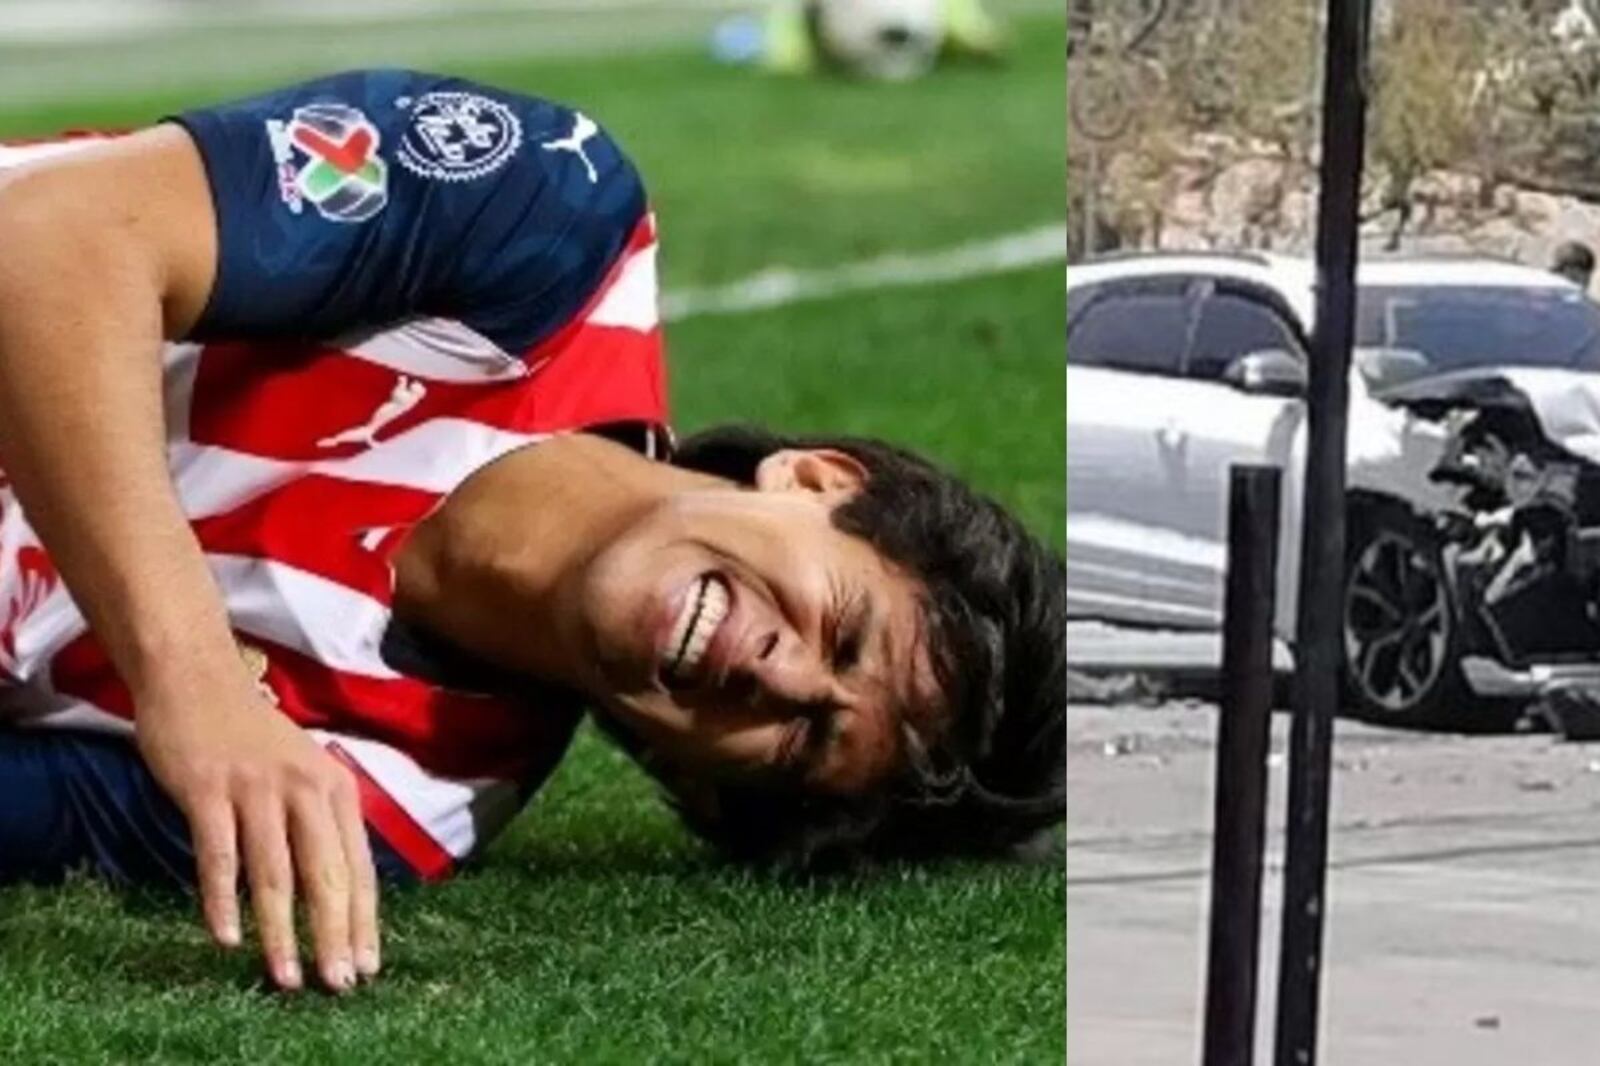 The three players who earn less in Chivas than the car that Macías crashed is worth